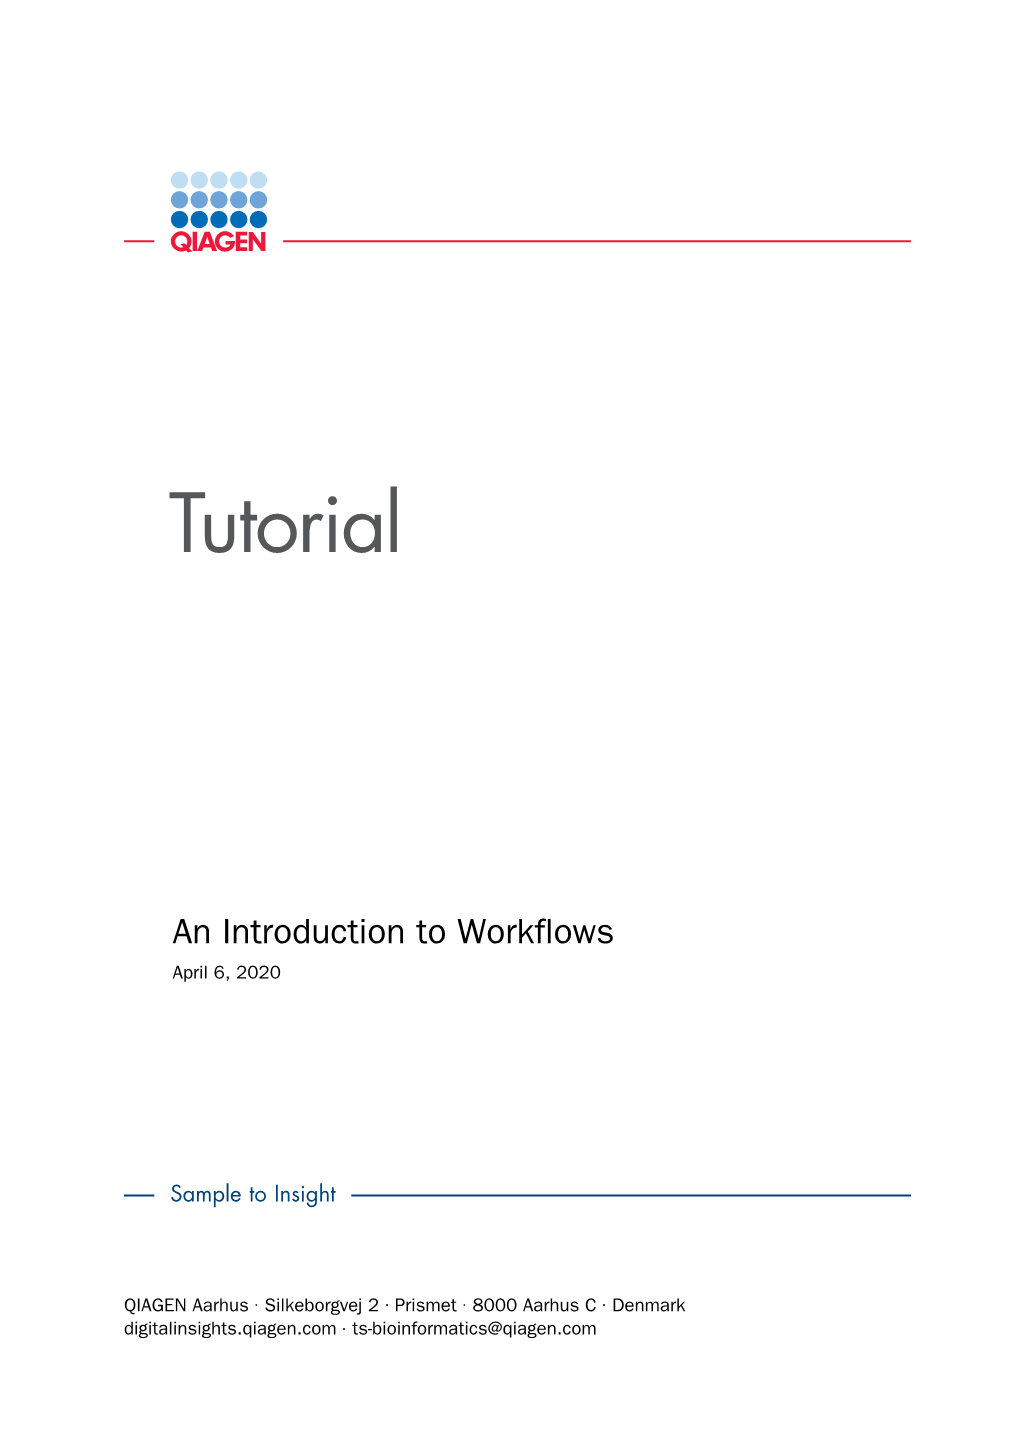 Introduction to Workflows April 6, 2020